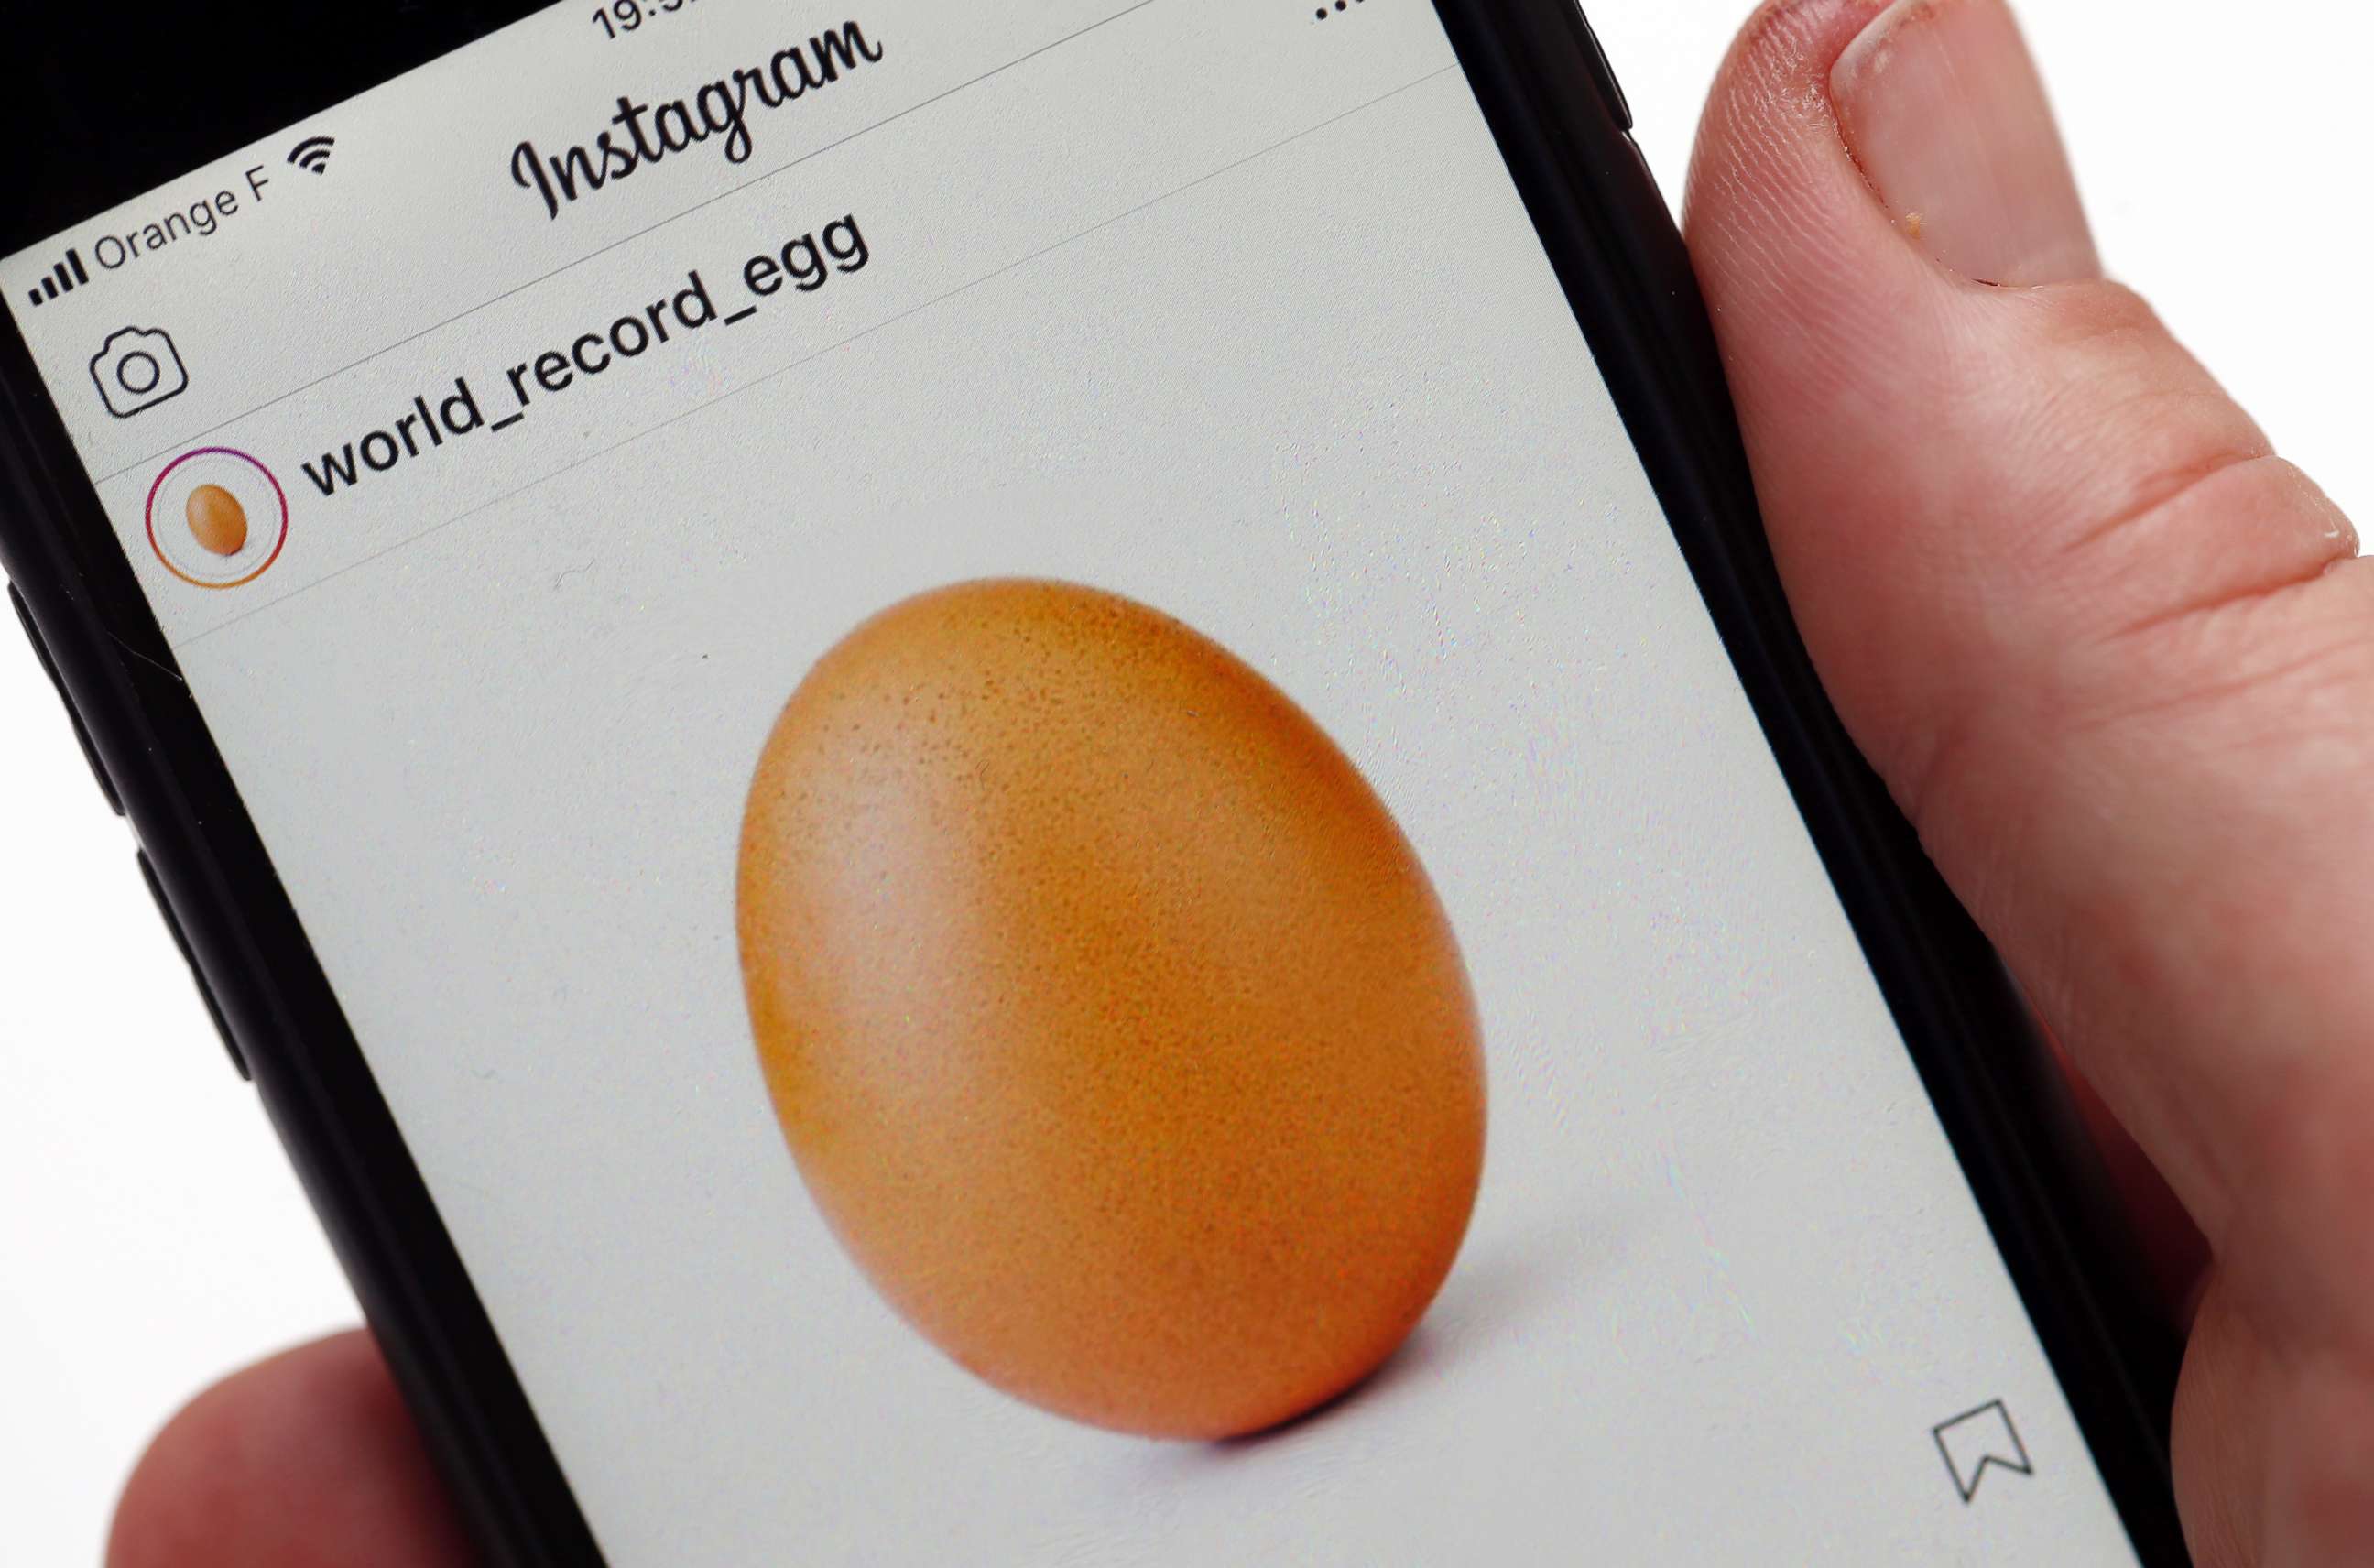 PHOTO: A mobile phone in Paris shows the image of an egg which was posted to Instagram on Jan. 4, 2019.